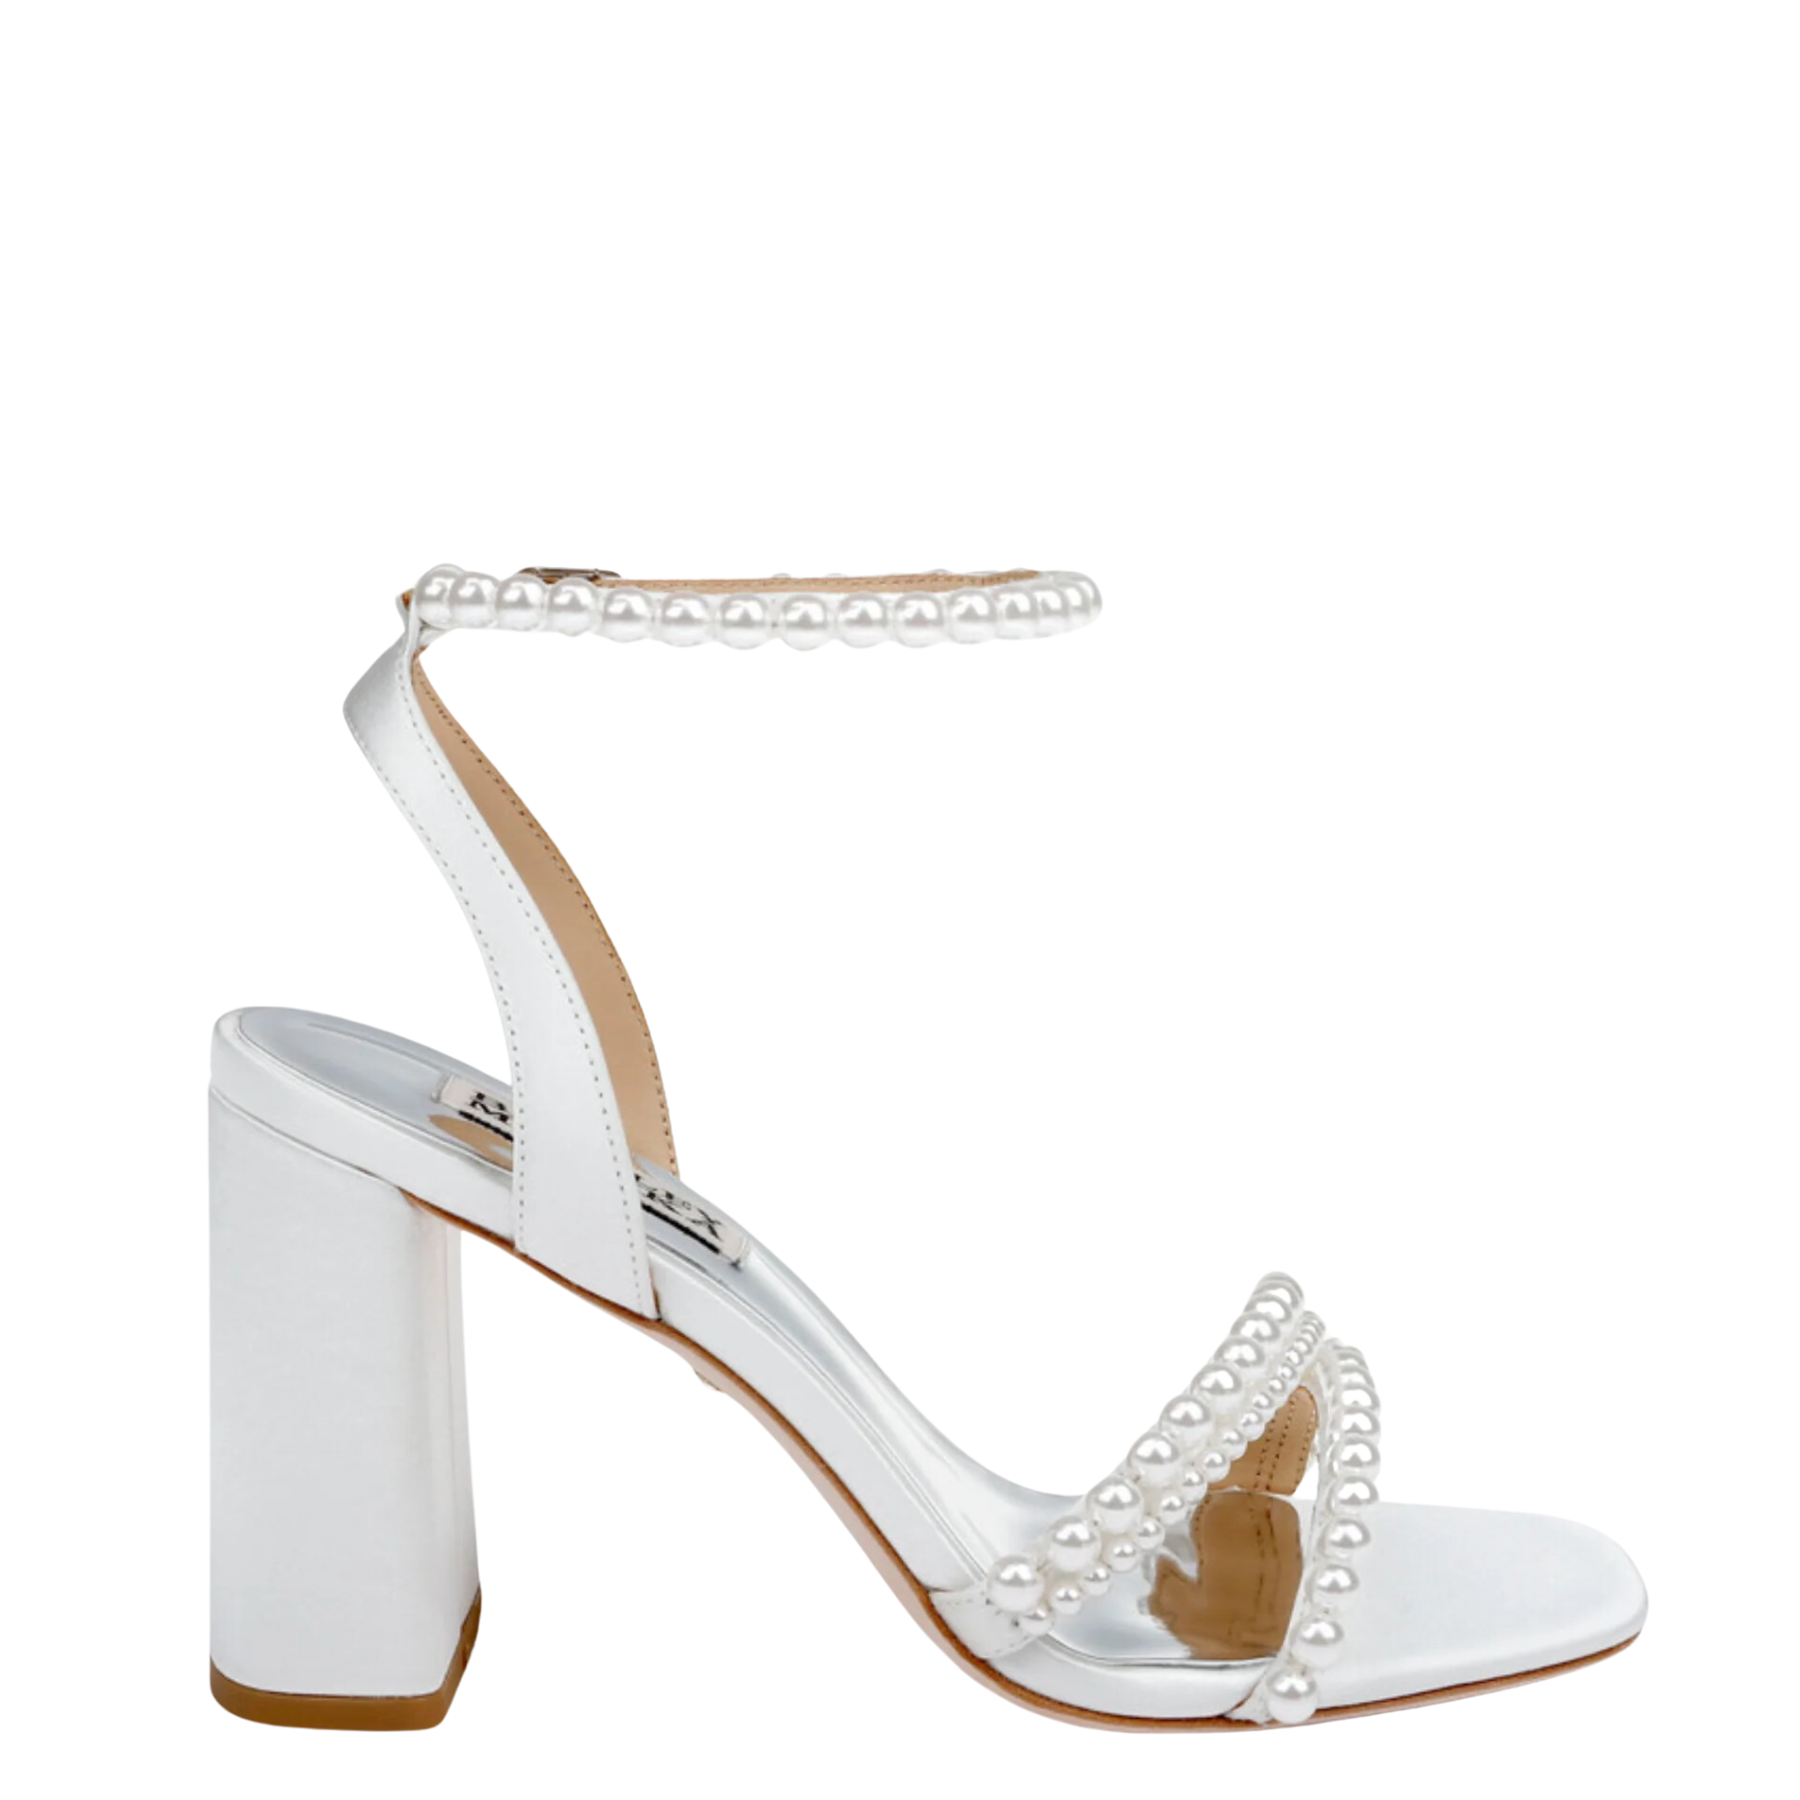 White Pumps For Every Type of Look - FashionActivation